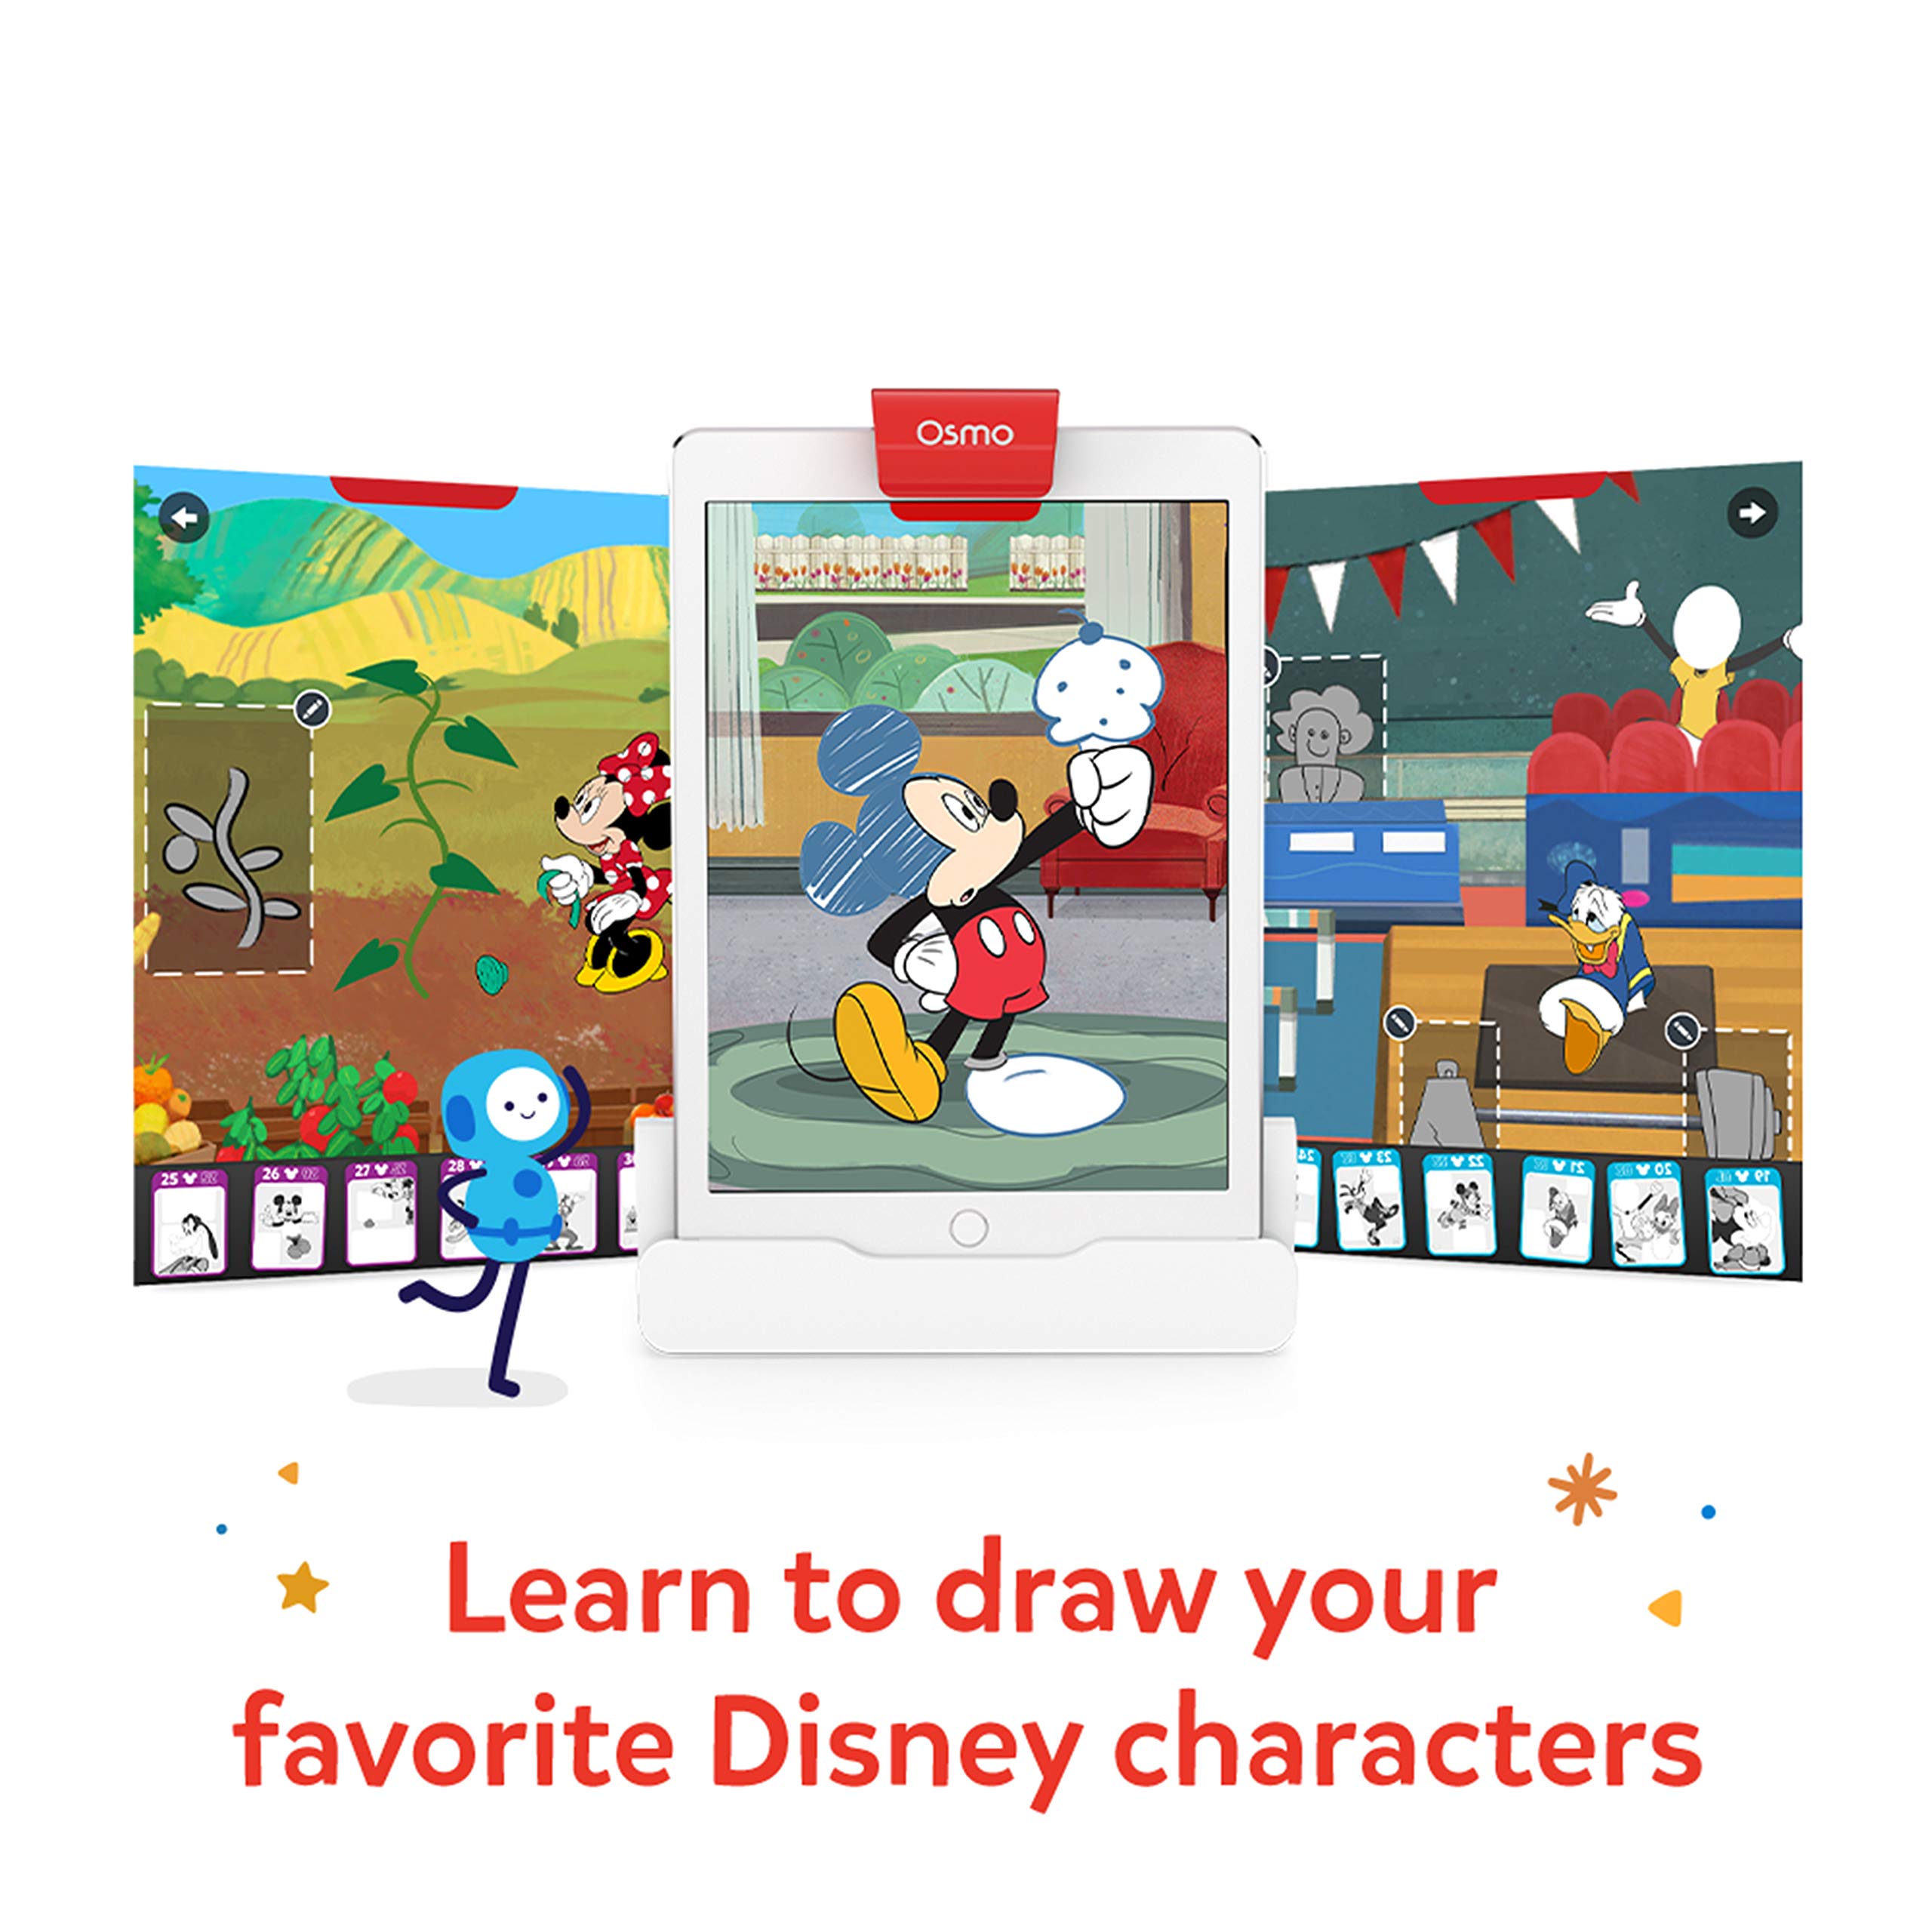 Osmo - Super Studio Disney Mickey Mouse & Friends - Ages 5-11 - Learn to Draw - For iPad or Fire Tablet Educational Learning Games - STEM Toy Gifts, Boy & Girl-Ages 5 6 7 8 9 10 11(Osmo Base Required)